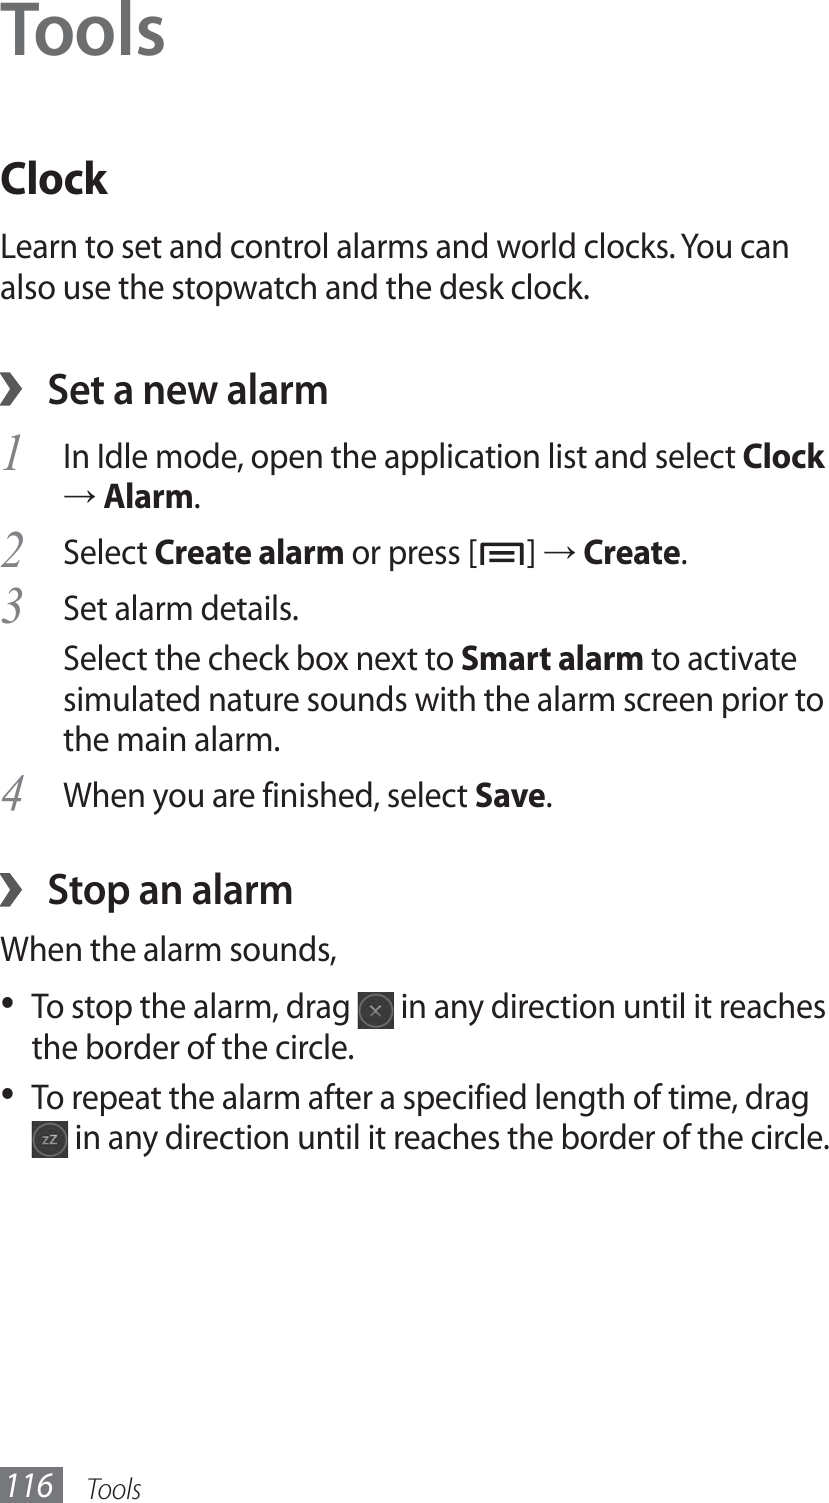 Tools116ToolsClockLearn to set and control alarms and world clocks. You can also use the stopwatch and the desk clock.Set a new alarm ›In Idle mode, open the application list and select 1 Clock → Alarm.Select 2 Create alarm or press [ ] → Create.Set alarm details.3 Select the check box next to Smart alarm to activate simulated nature sounds with the alarm screen prior to the main alarm.When you are finished, select 4 Save.Stop an alarm ›When the alarm sounds,To stop the alarm, drag •   in any direction until it reaches the border of the circle.To repeat the alarm after a specified length of time, drag •  in any direction until it reaches the border of the circle.